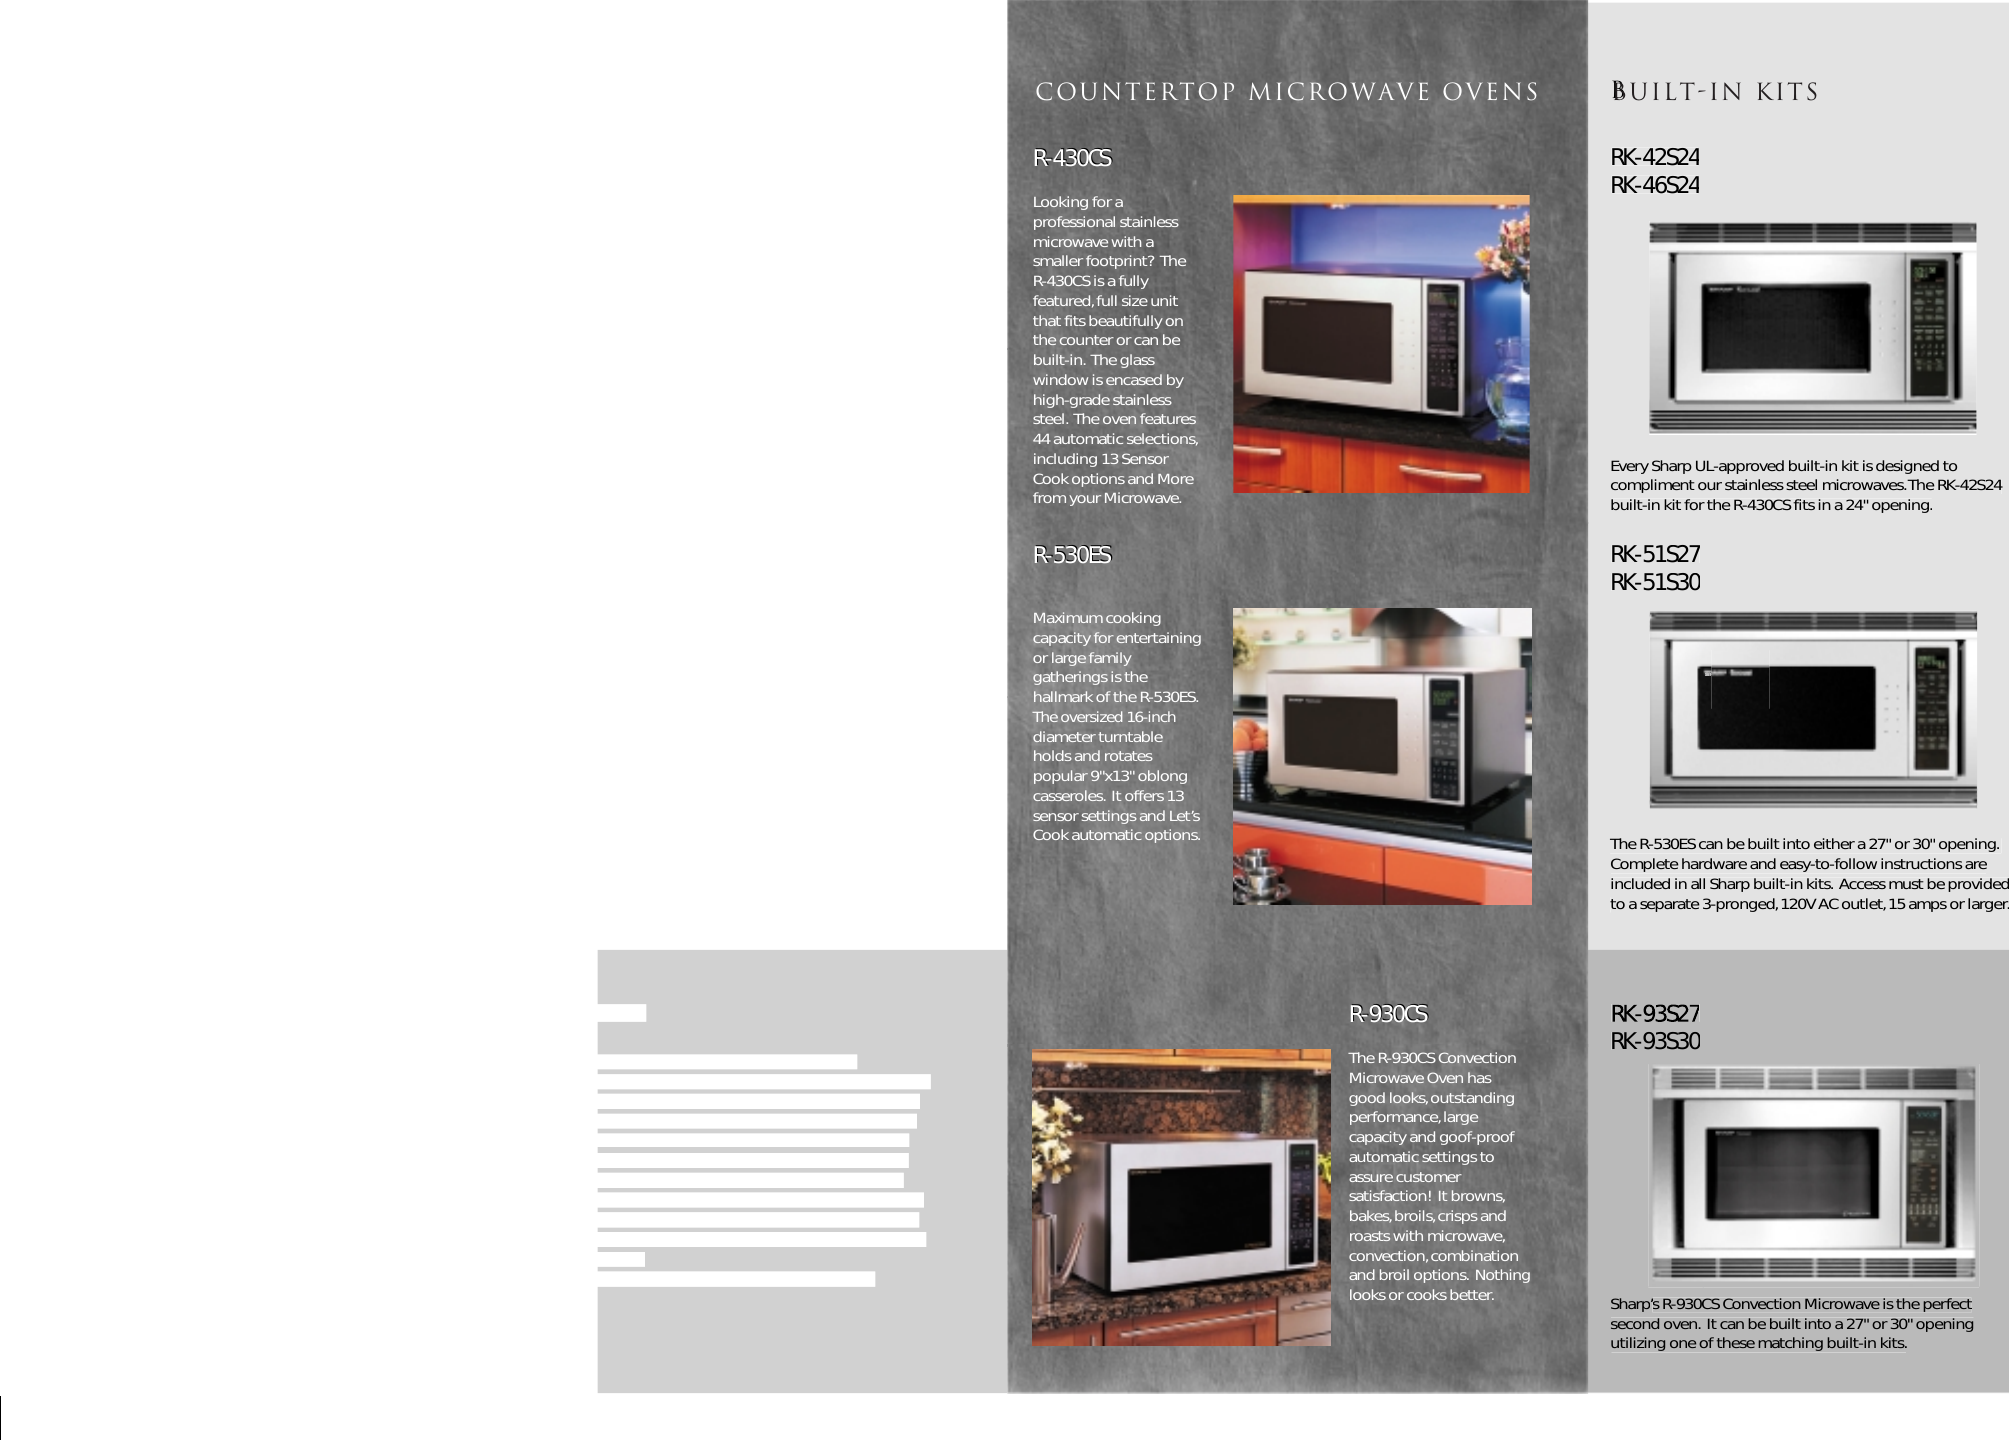 Page 3 of 5 - Sharp Sharp-Stainless-Steel-Microwave-Oven-Users-Manual- Stainless Steel Microwave Oven Brochure  Sharp-stainless-steel-microwave-oven-users-manual